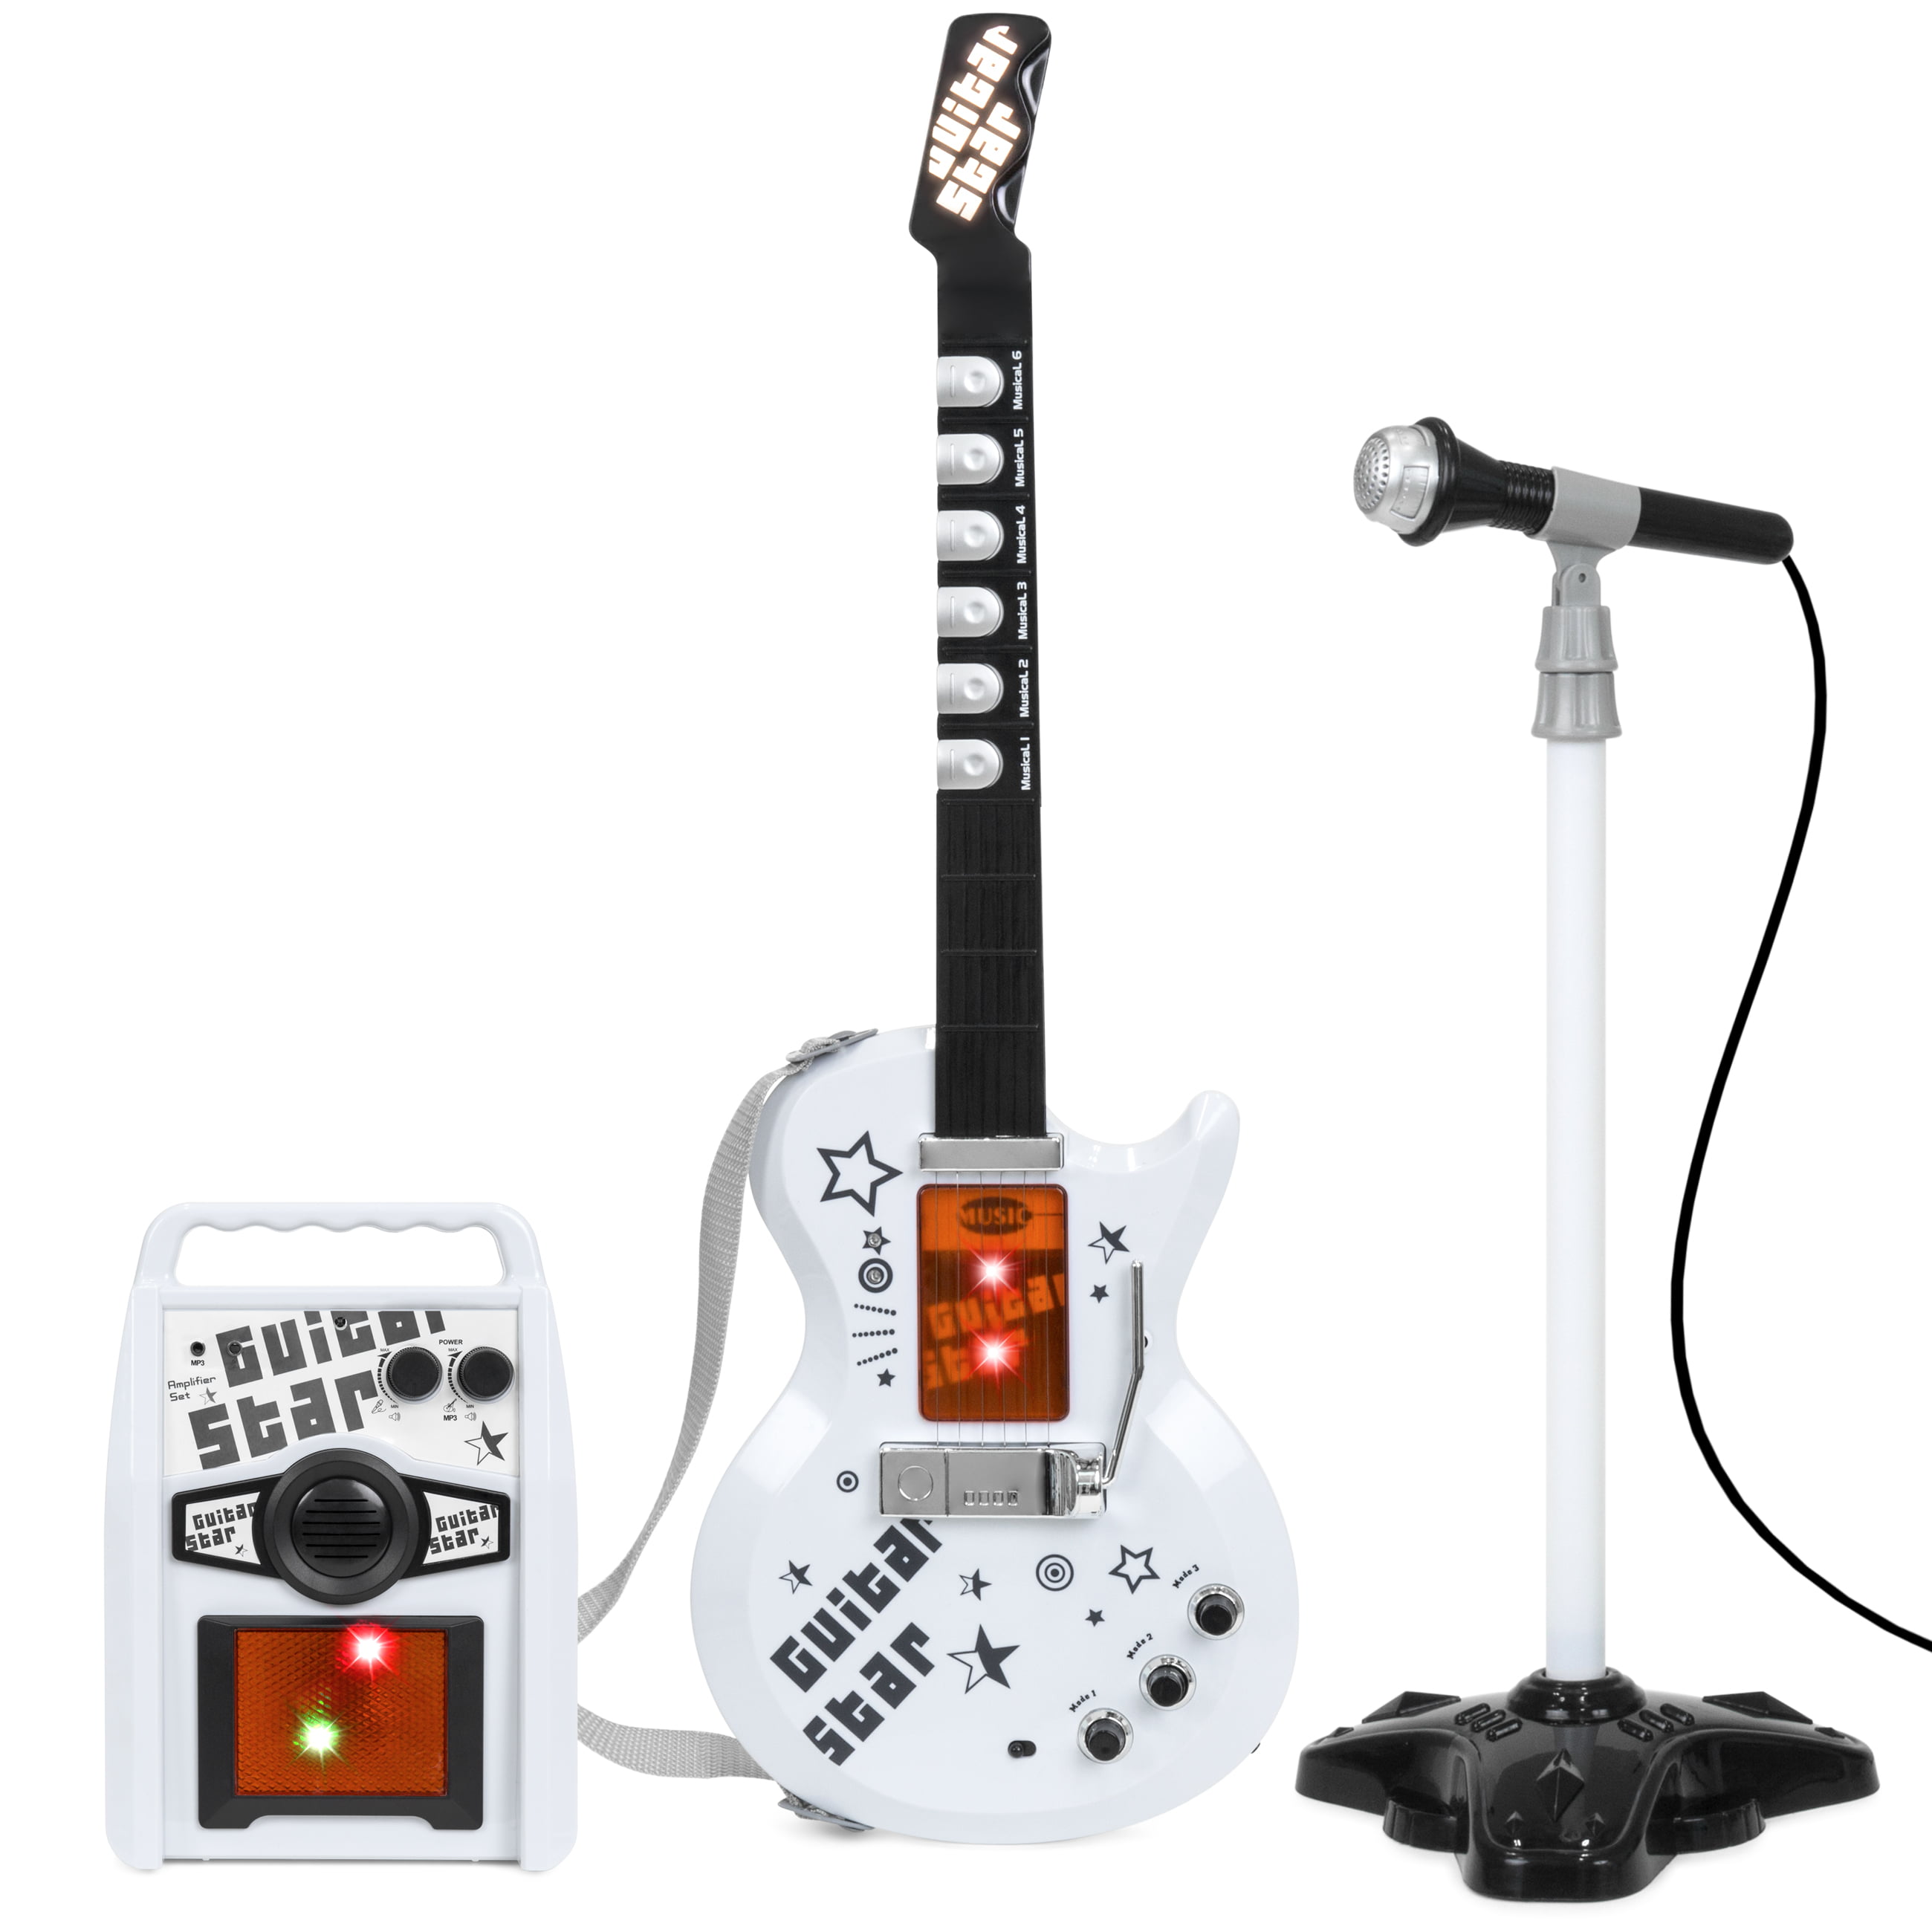 Kids Electric Musical Guitar Toy Play Set W/ 6 Demo Songs Bar Microphone HOT TOY 